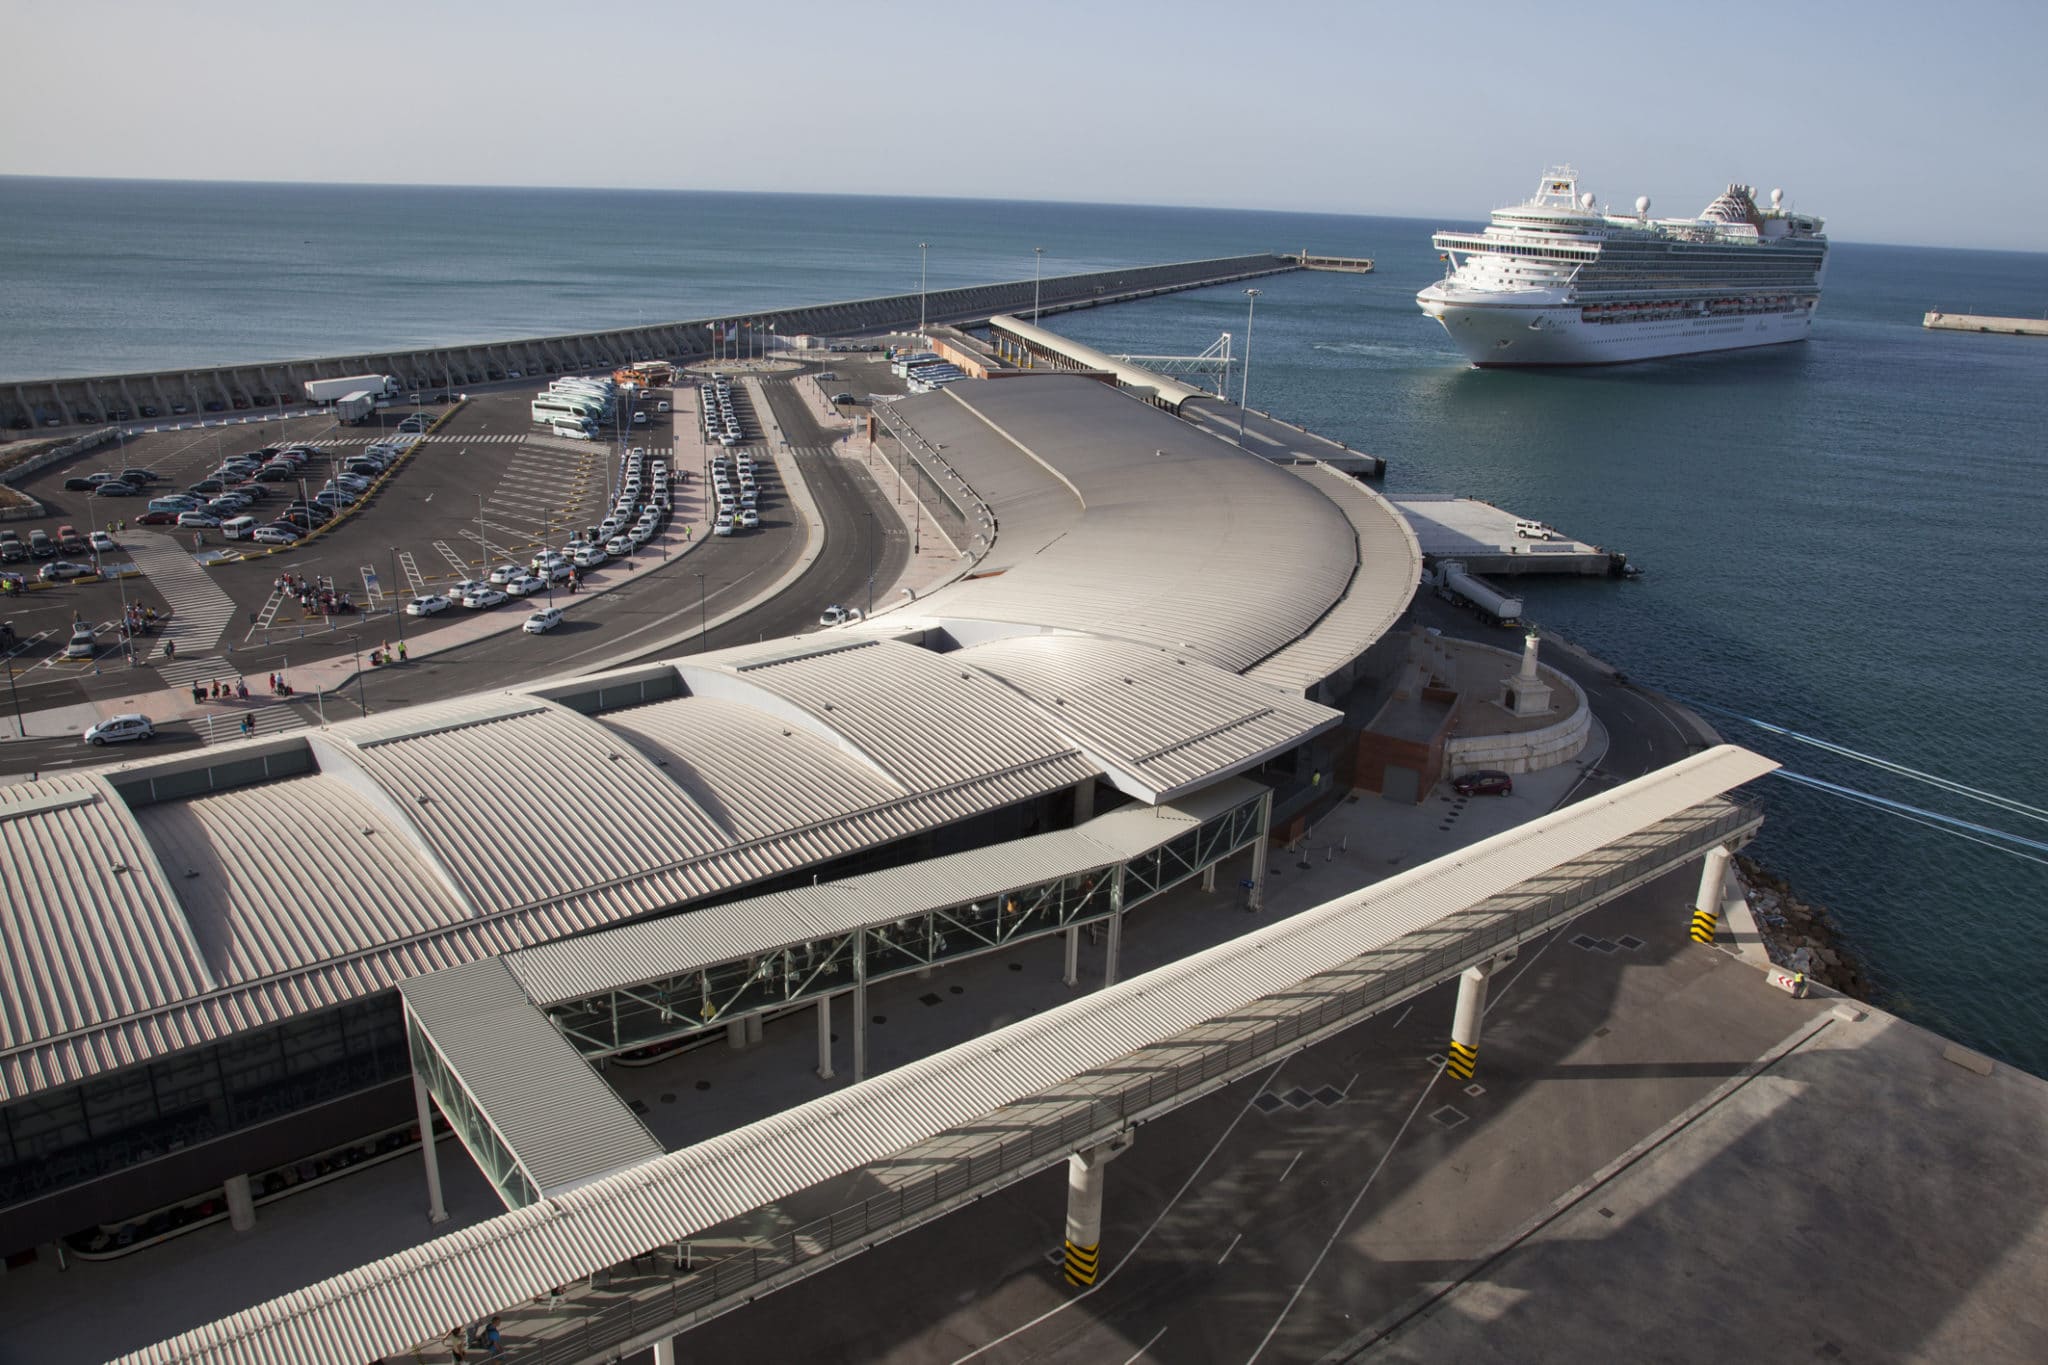 Telefónica And NTT DATA Use 5G To Increase The Security Of The Port Of Malaga